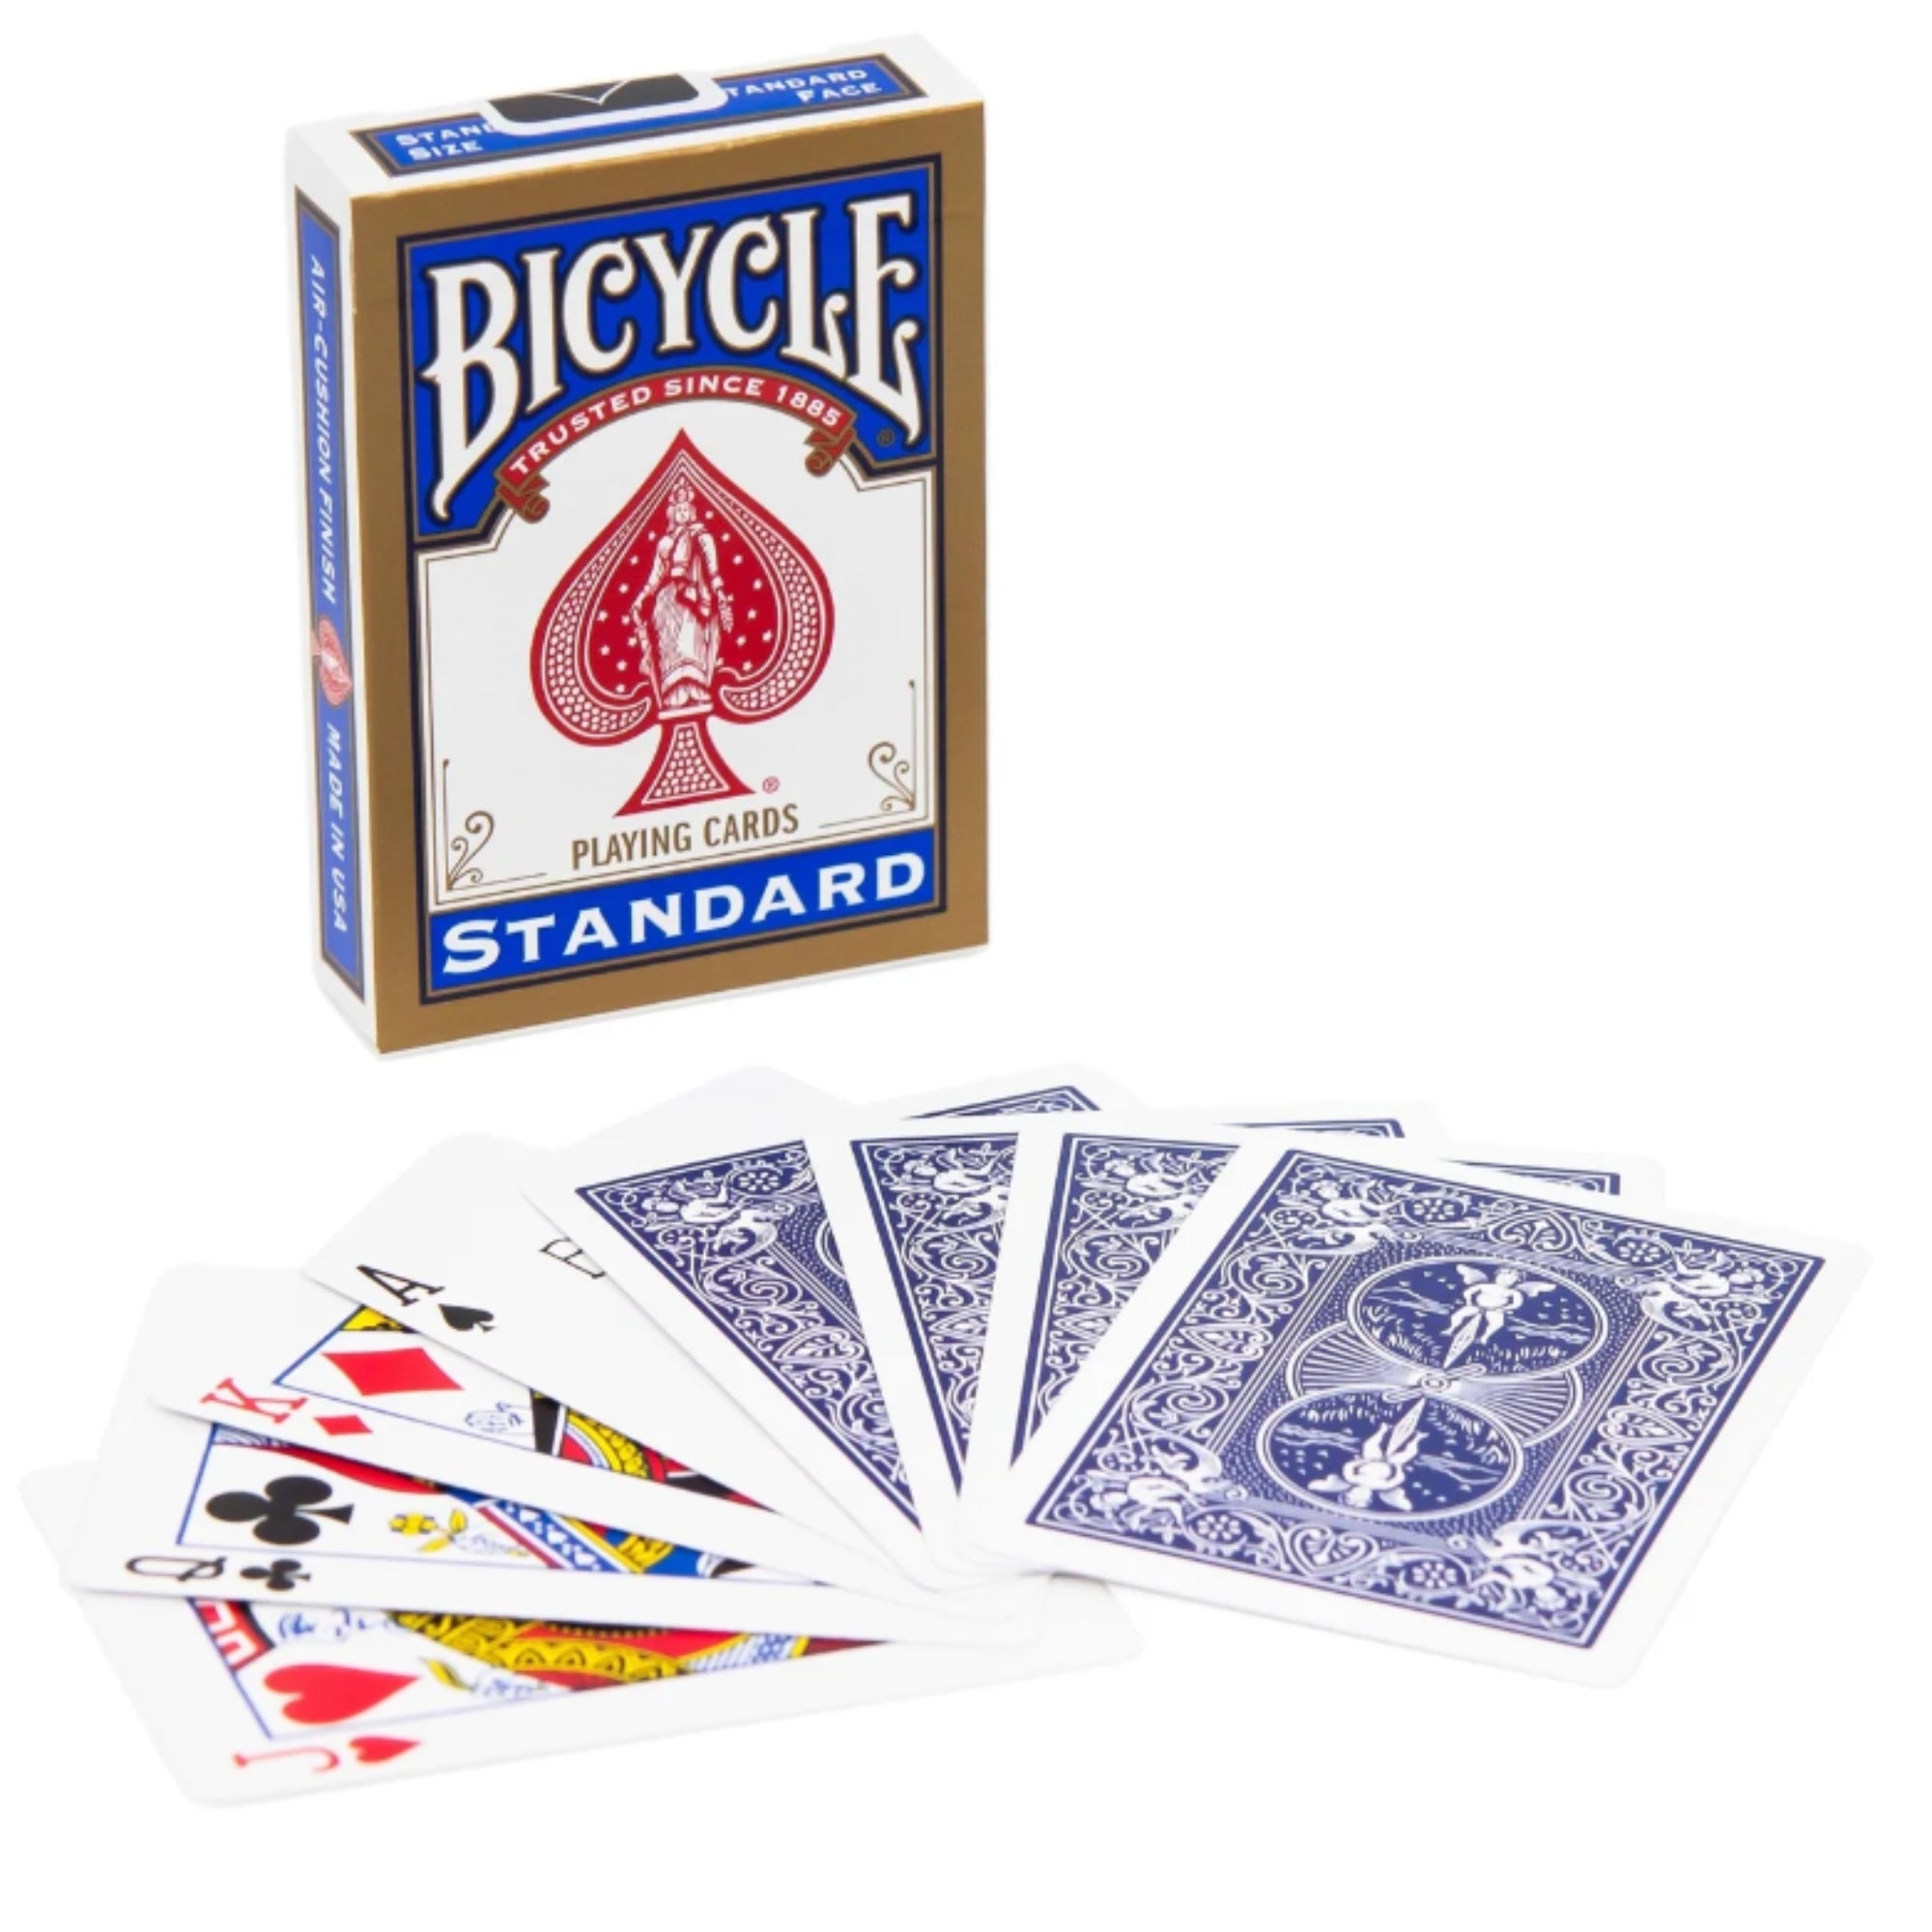 Bicycle Standard Deck blue packet and cards